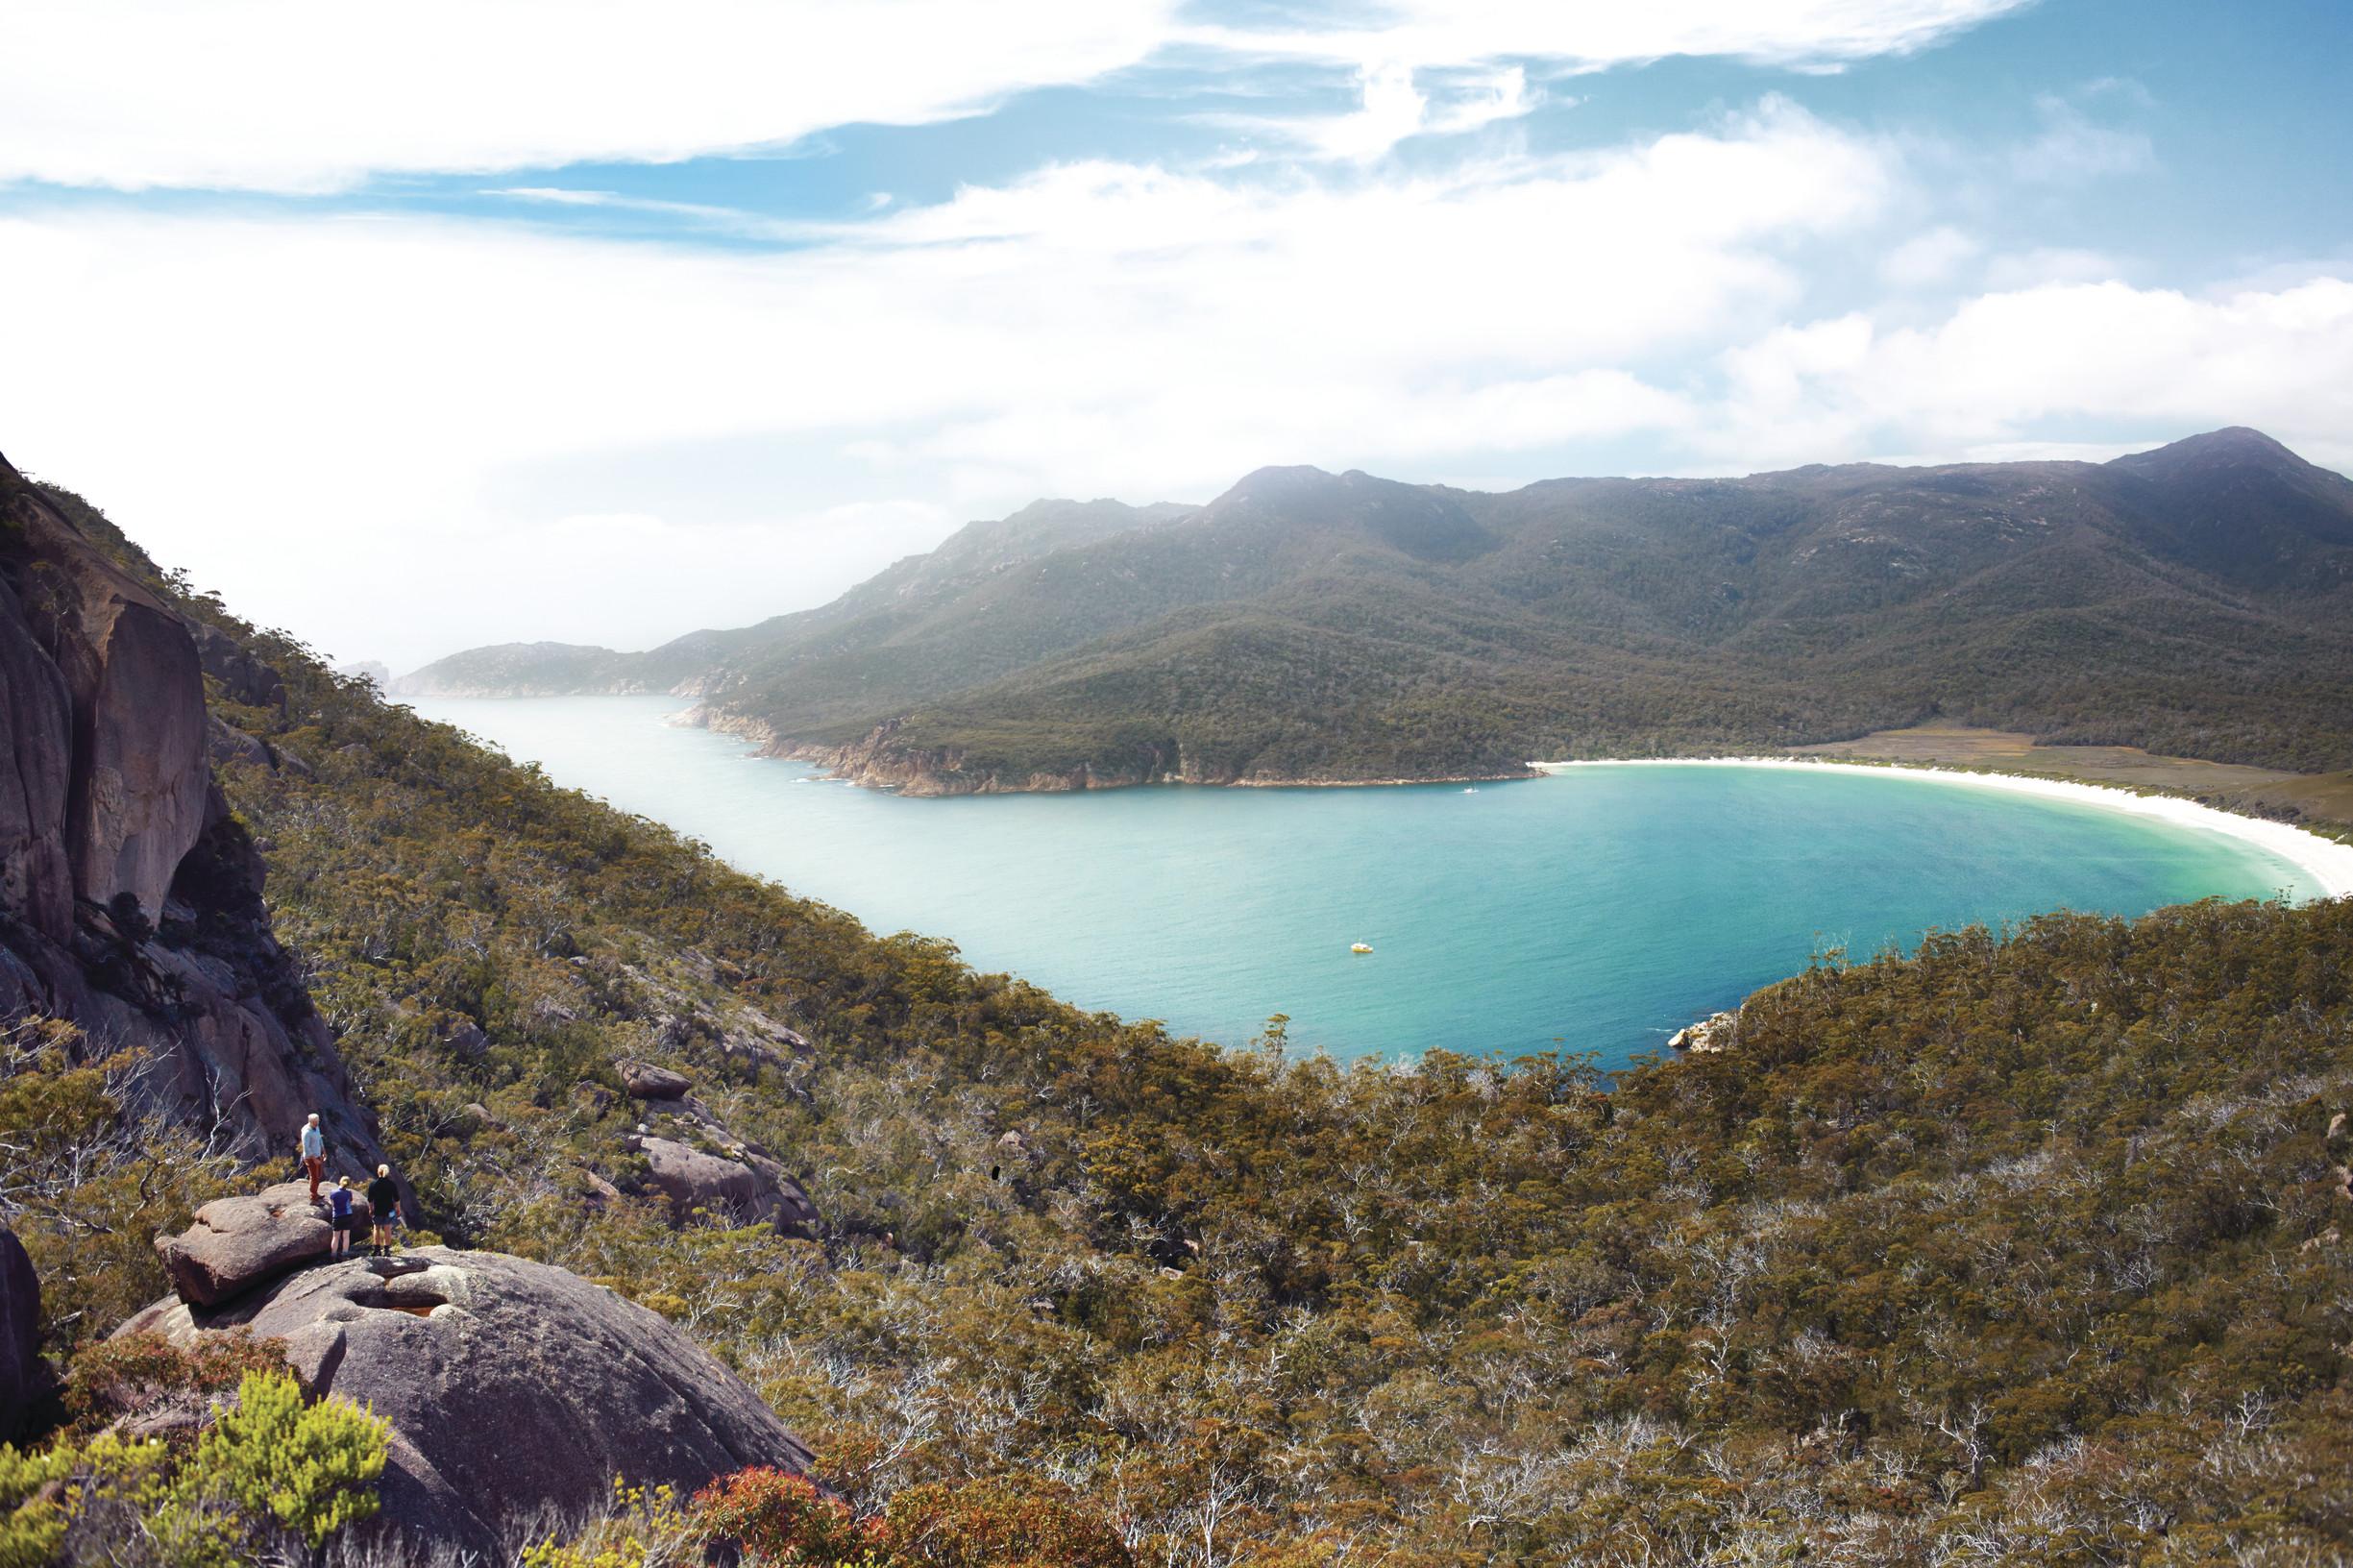 &#13;
The white curves of Wineglass Bay &#13;